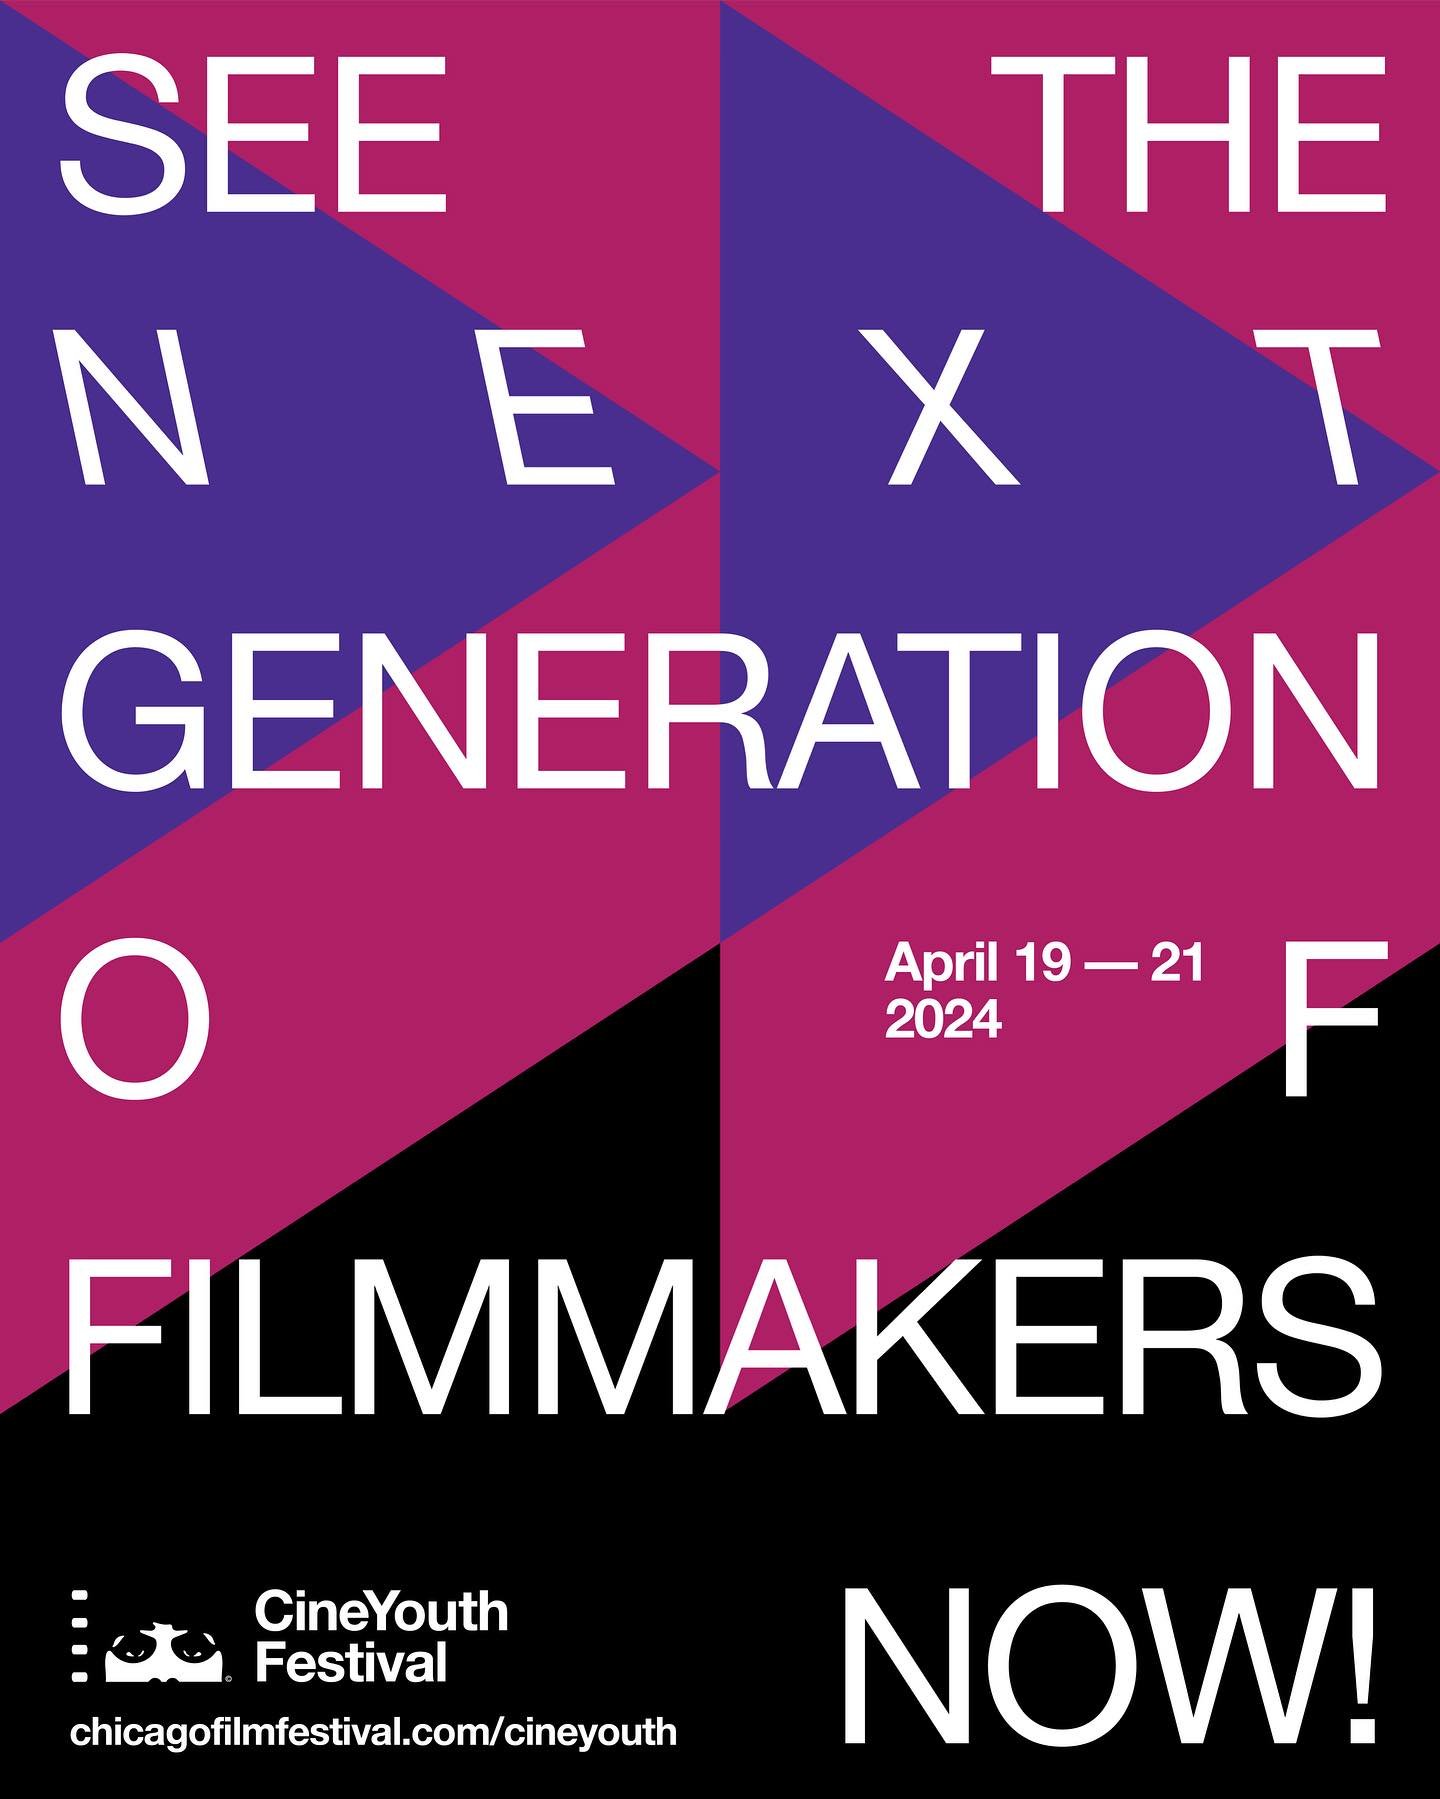 Heads up, CHICAGO!

There&rsquo;s an event coming up we&rsquo;d love to share with you. 

See the next generation of filmmakers at #CineYouth Festival, presented by @ChiFilmFest, both in-person in Chicago at @facetschicago from April 19-21 and virtua